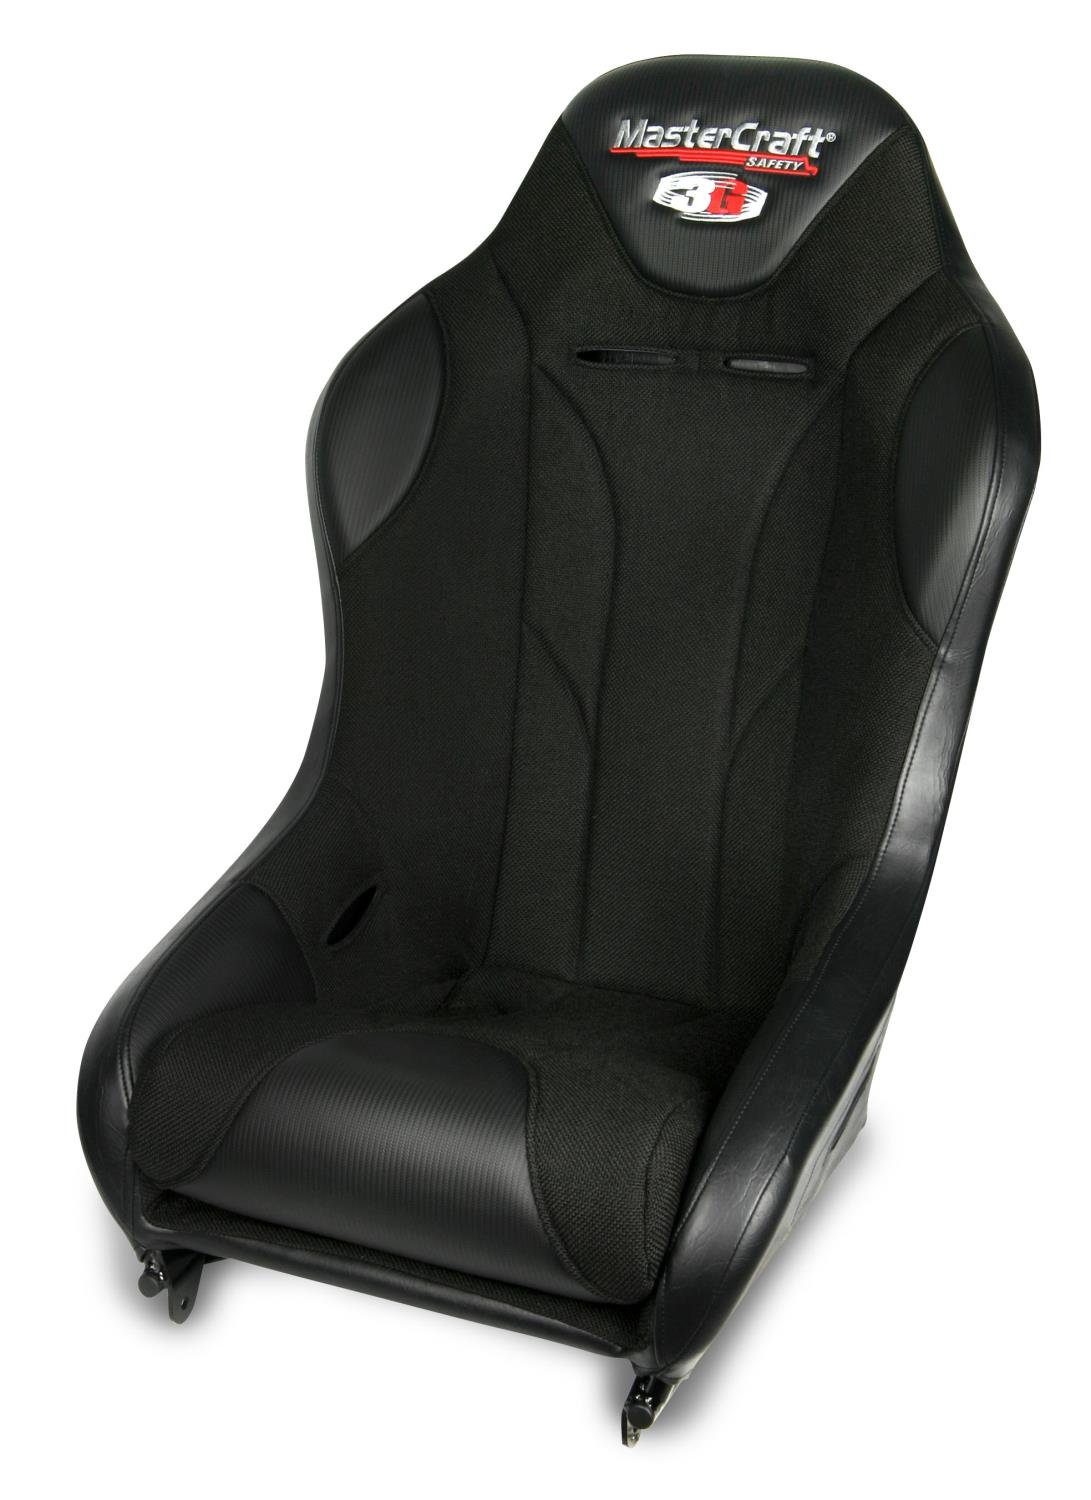 572034 2 in. WIDER 3G-4 Seat w/DirtSport Stitch Pattern, Black with Black Fabric Center and Side Panels, Black Band